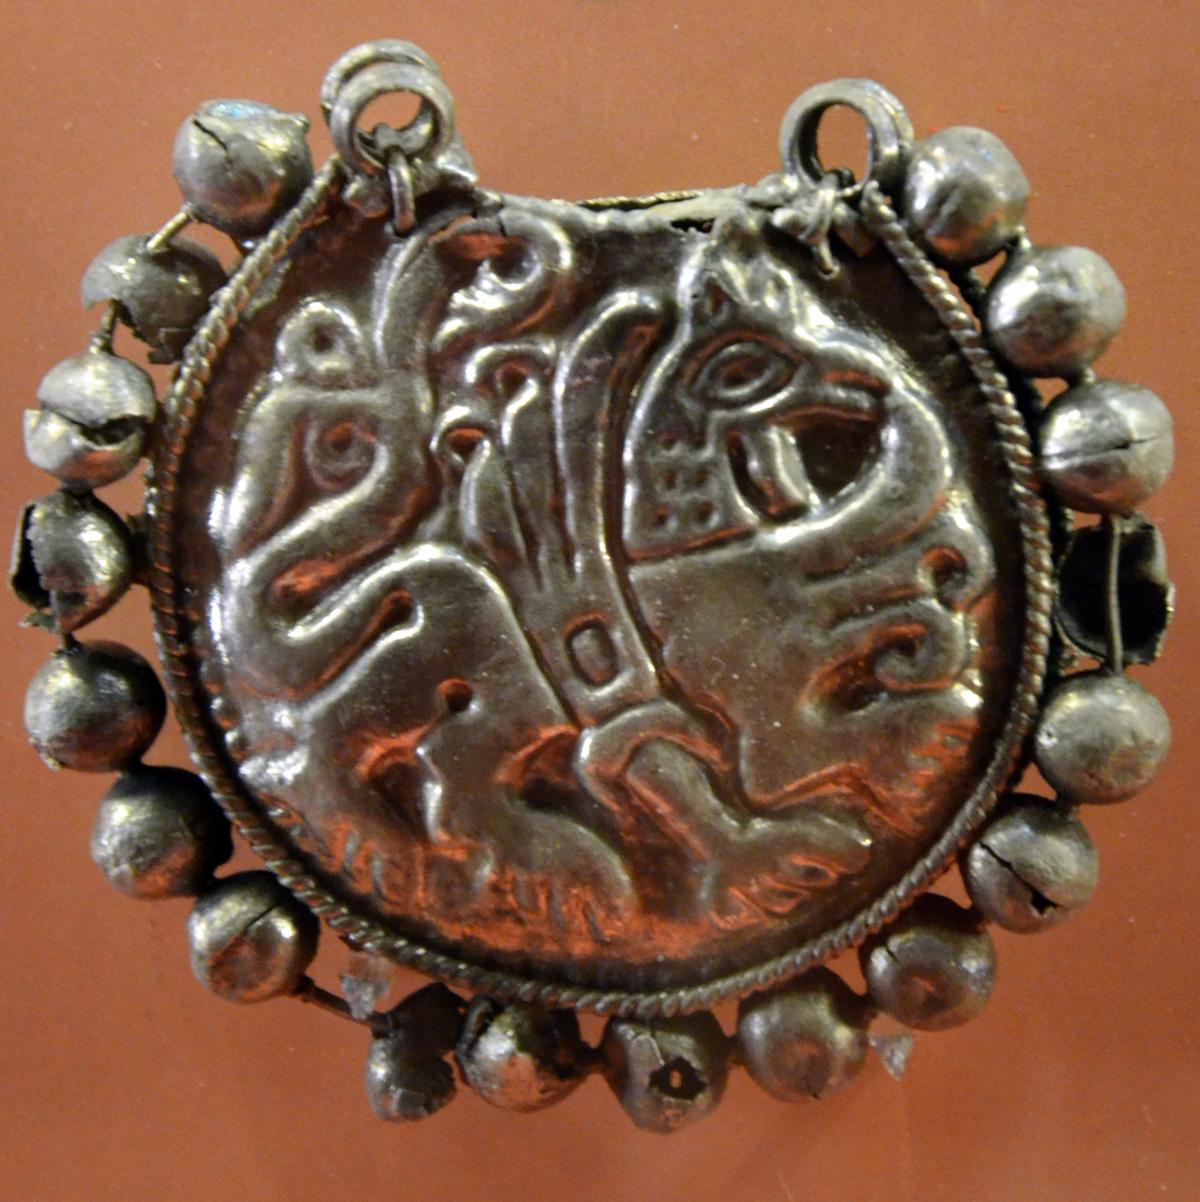 Wikipedia, 12th-century jewellery, Archaeological collections in the Historical Museum in Sanok, Cem